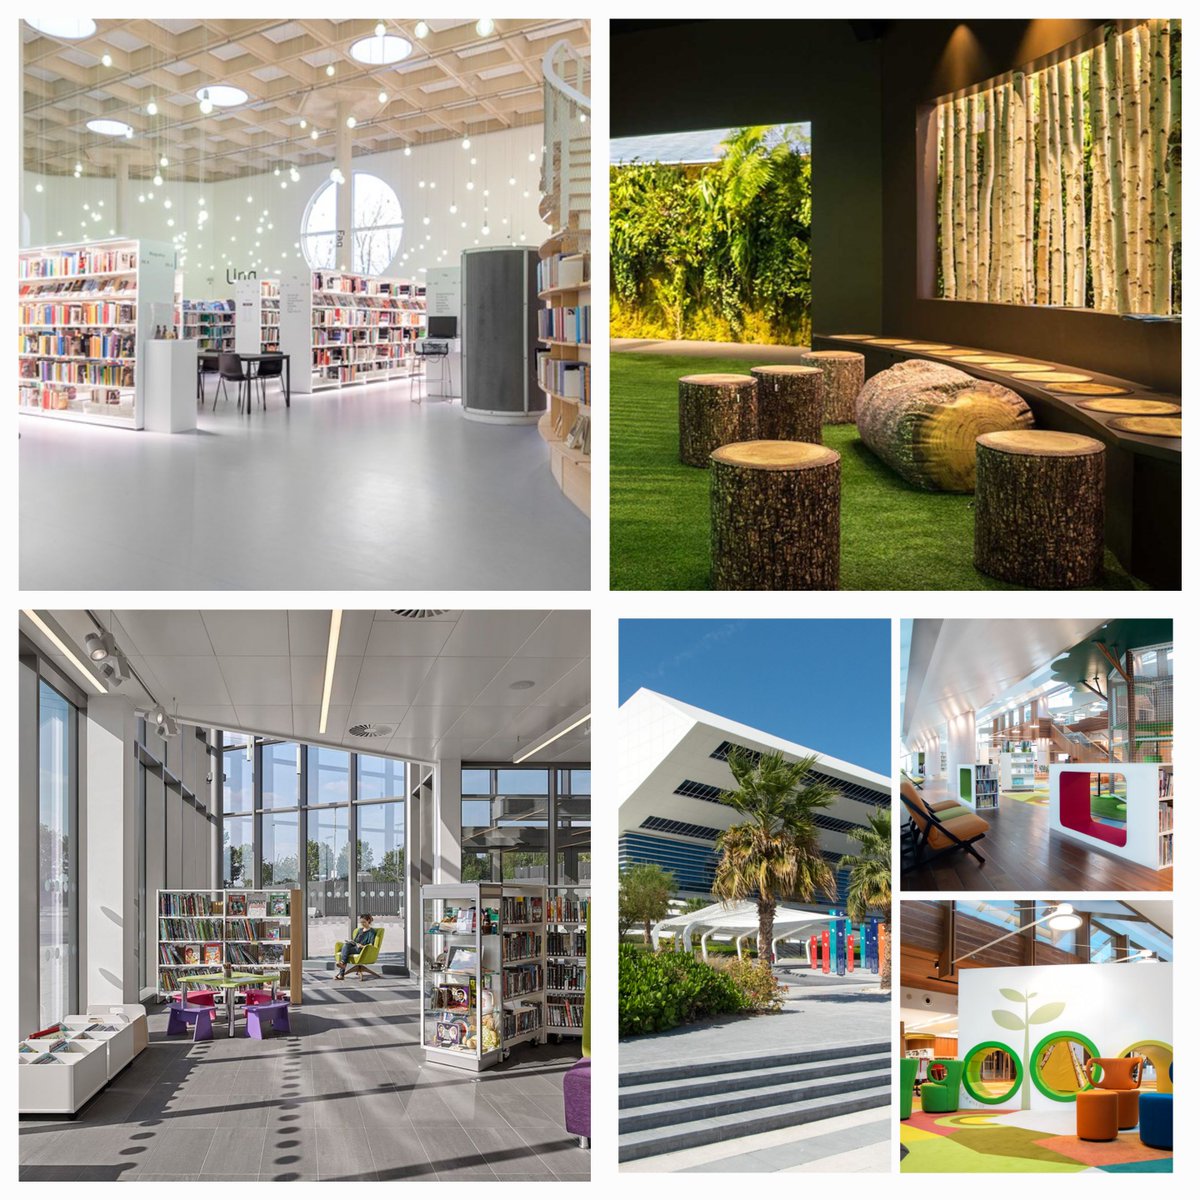 GOT LIF FUNDING? Need any help with new ideas? Just lift the phone if you'd like a chat or presentation on the latest in #librarydesign #biophilicdesign #ideaszones #enterprise #libraryhubs #familyhubs #sensory #makerspaces #LifFunding See you at @libsconnected conference!